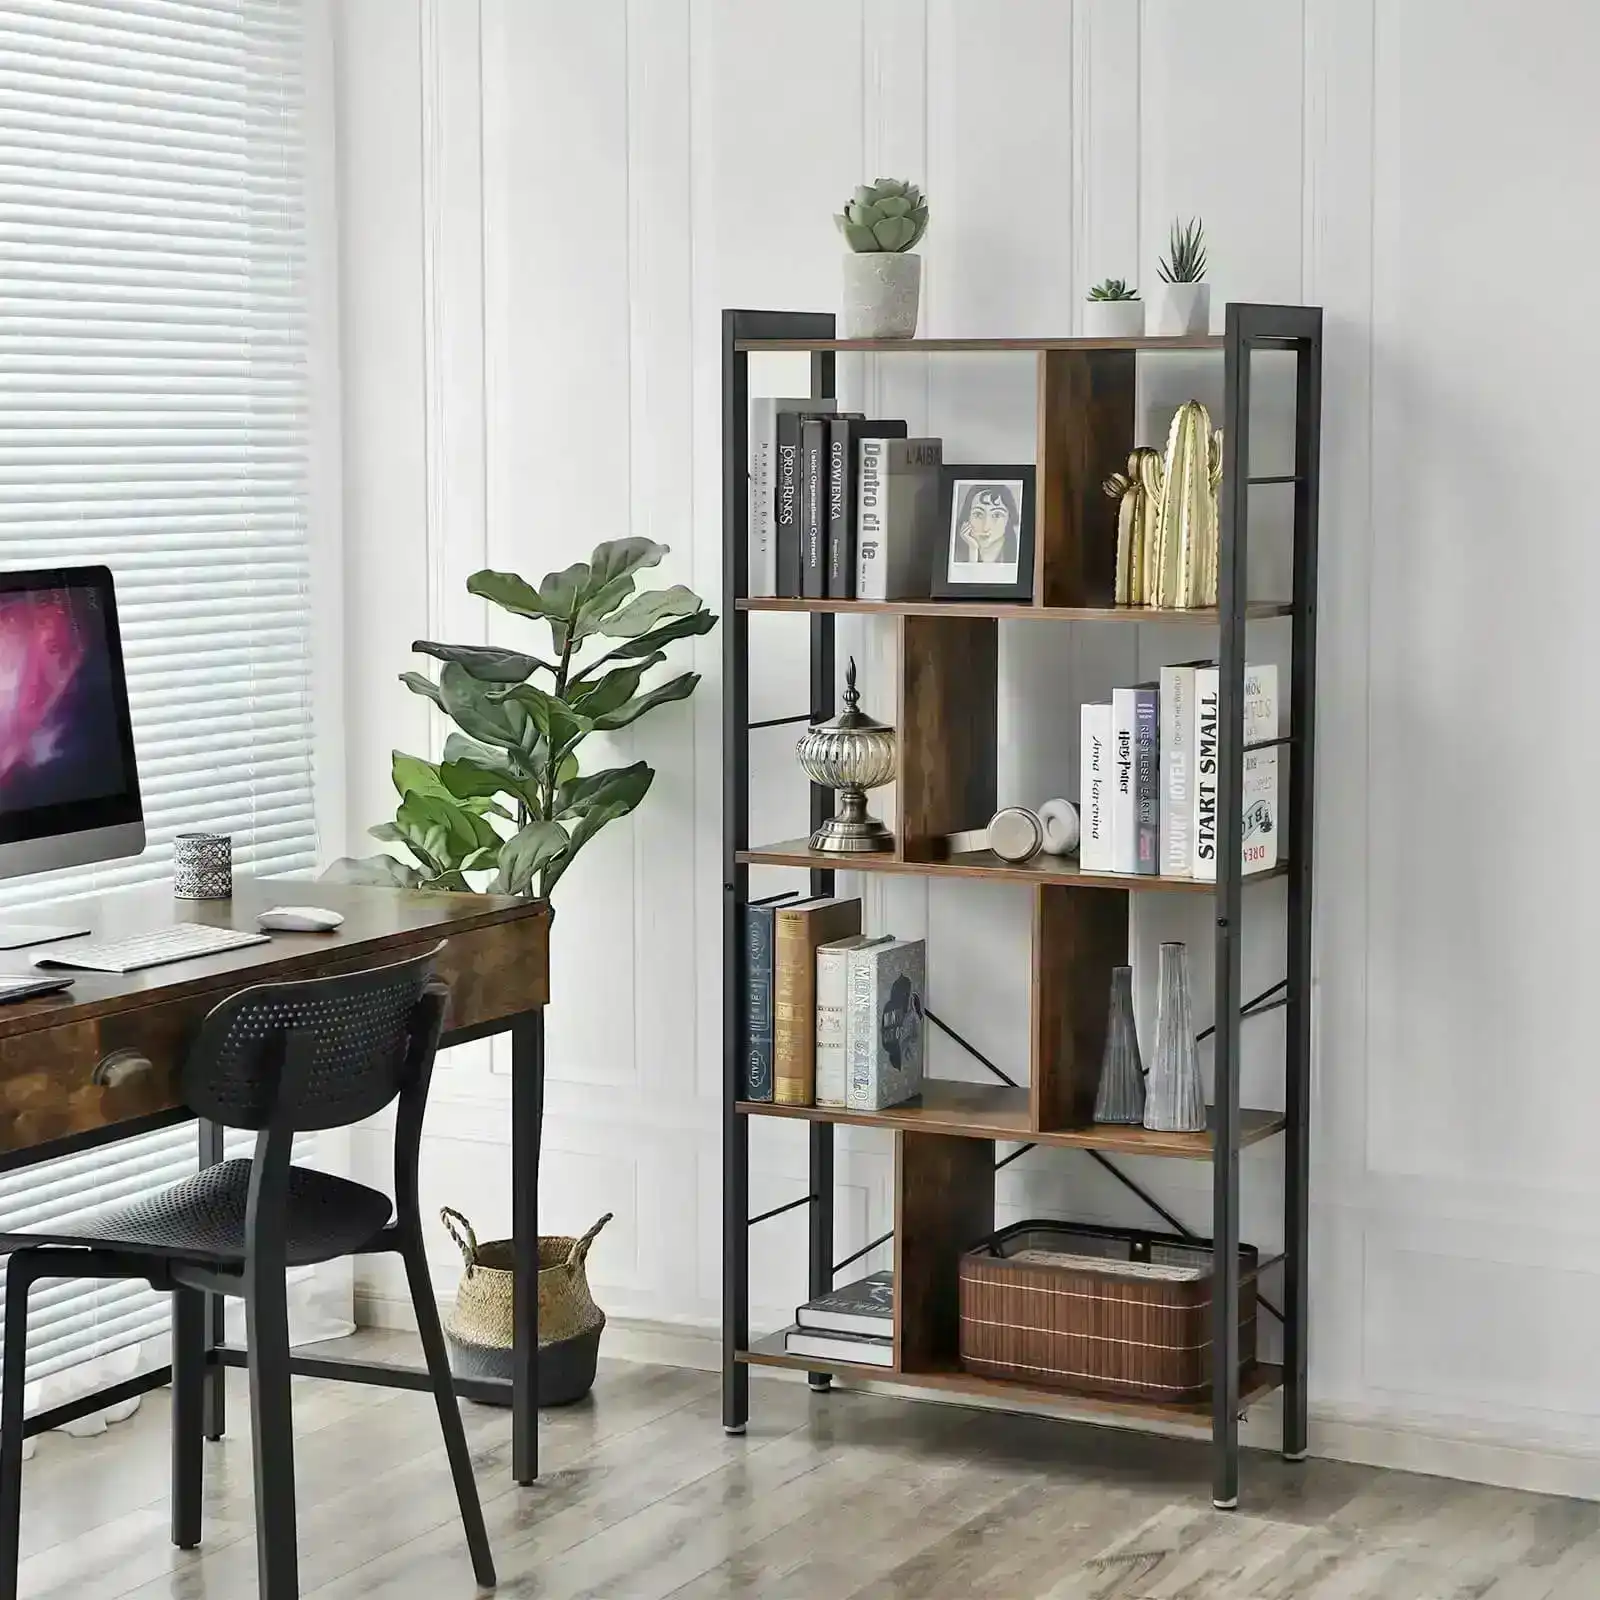 VASAGLE Industrial 4-Tier Wooden Bookshelf - Rustic Brown Bookcase with Steel Frame - Large Storage Space for Home and Office